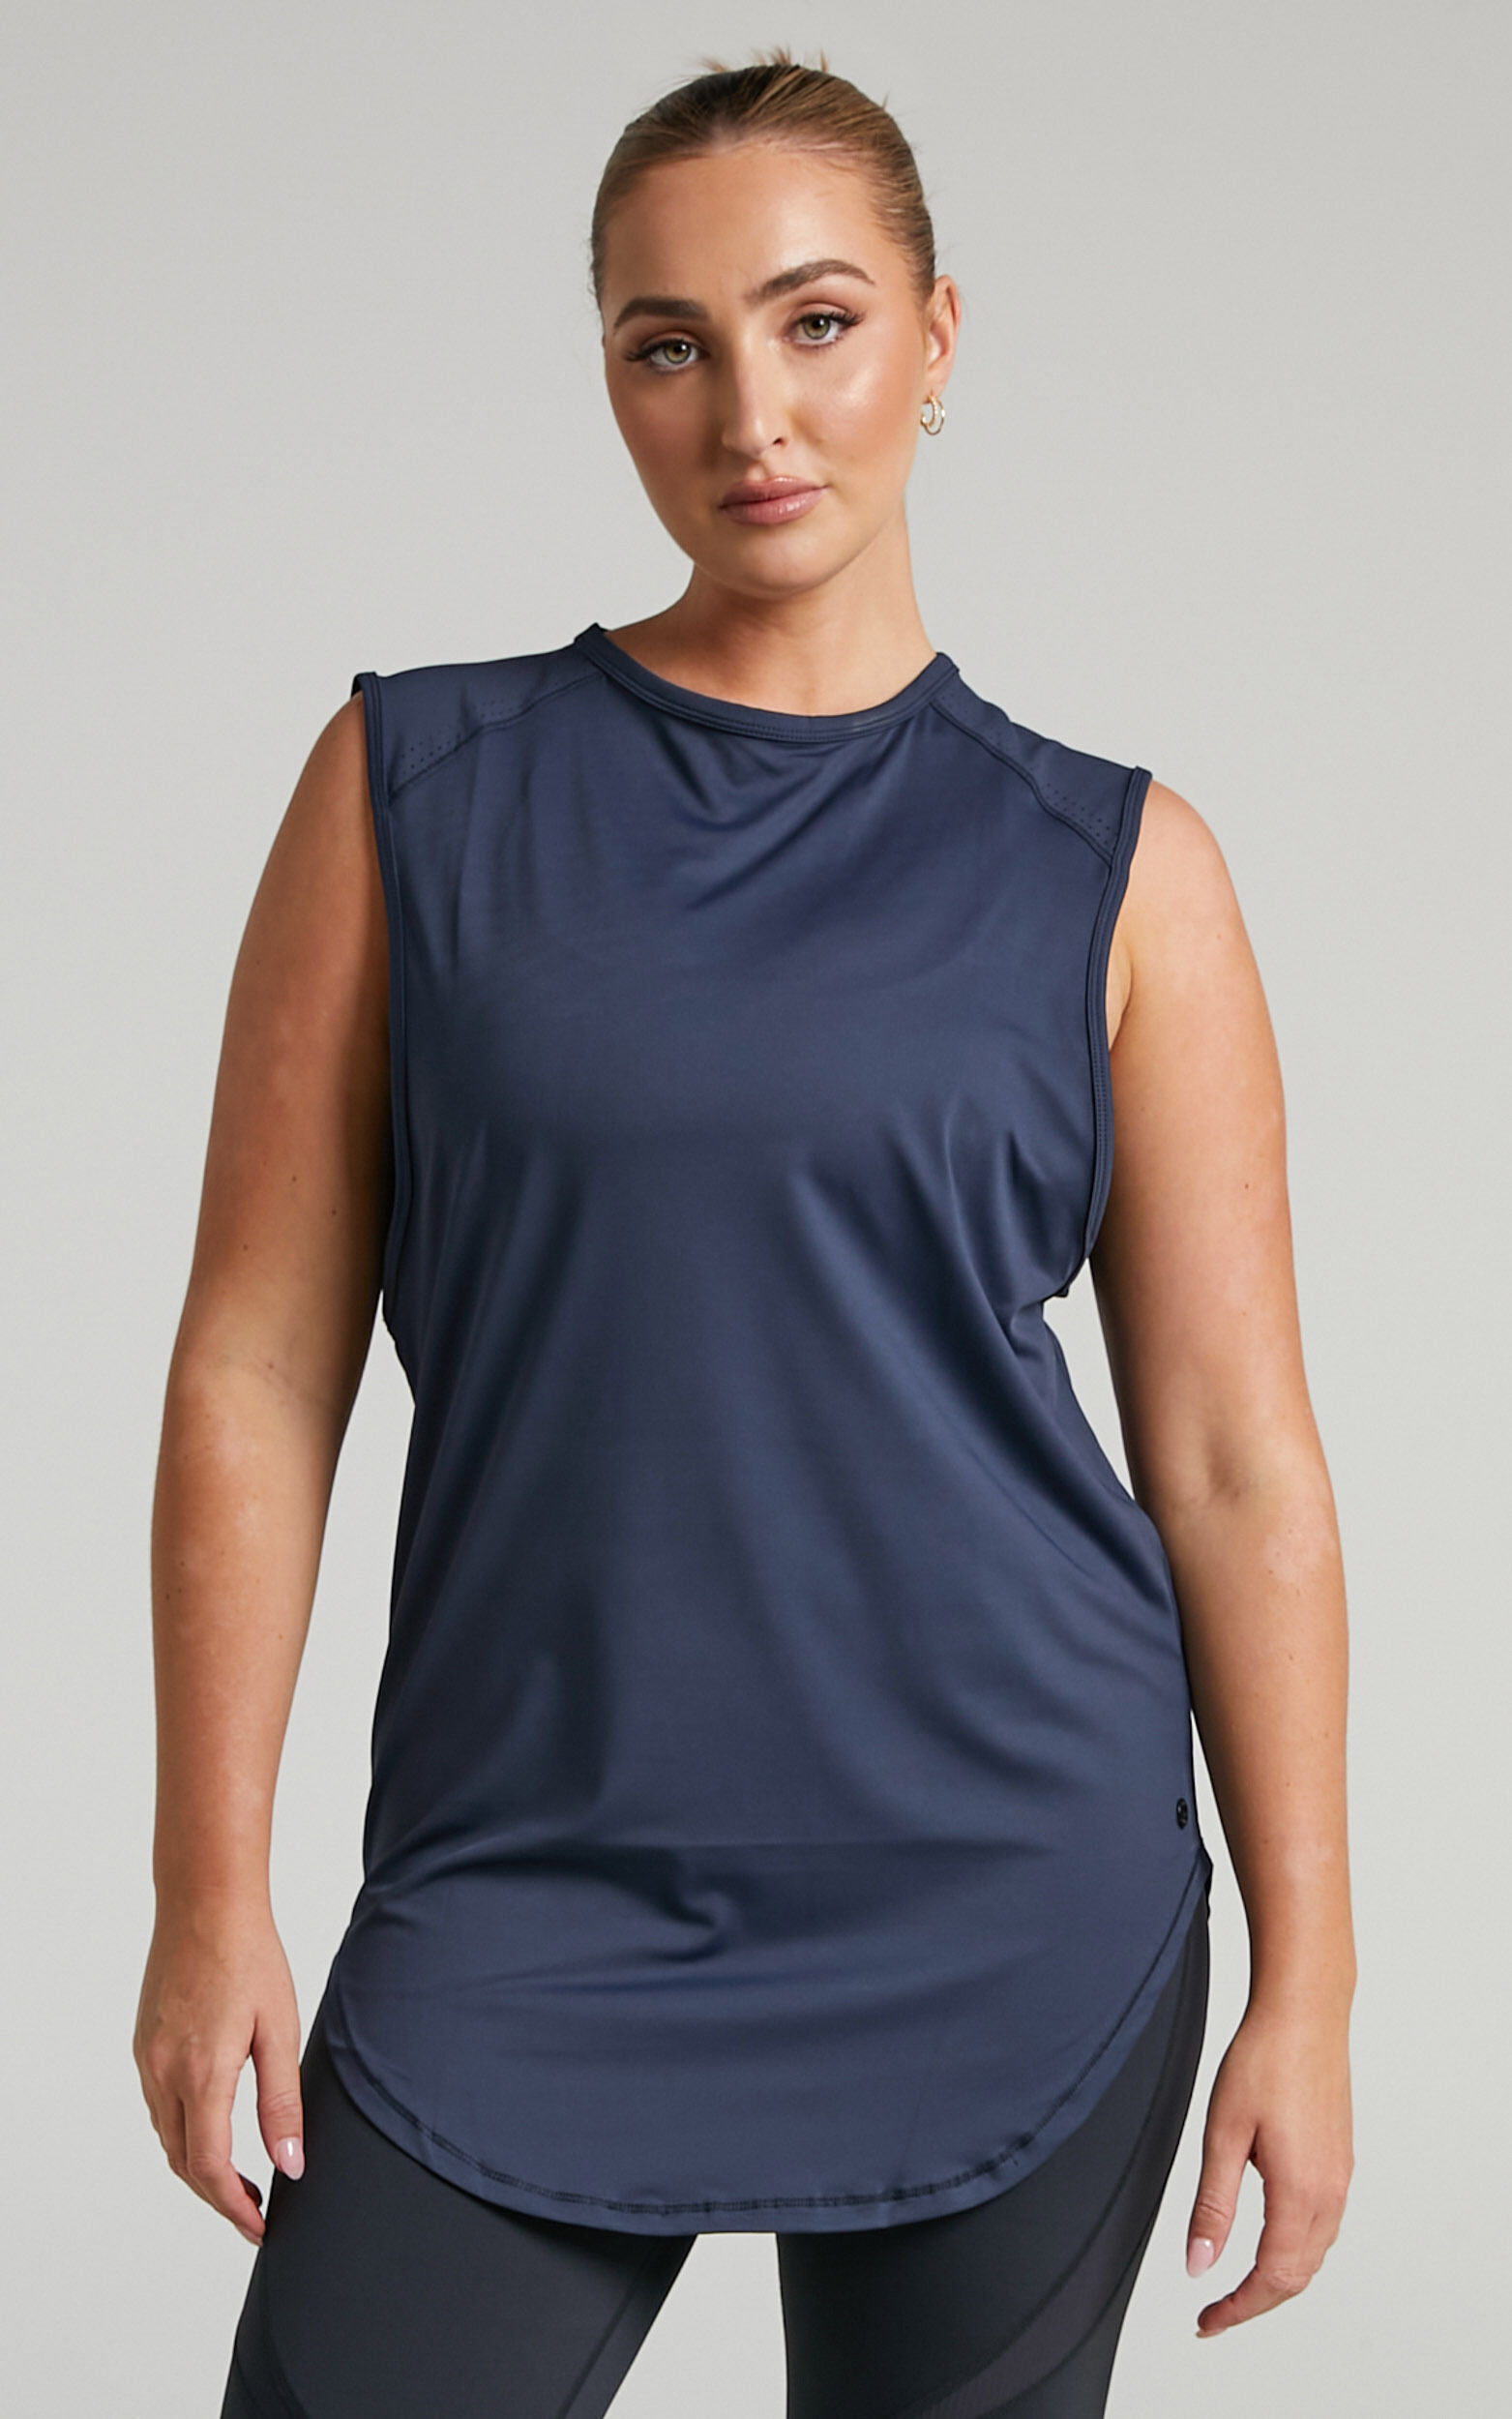 Lilybod - Zady Top in Blue Nights - M, NVY1